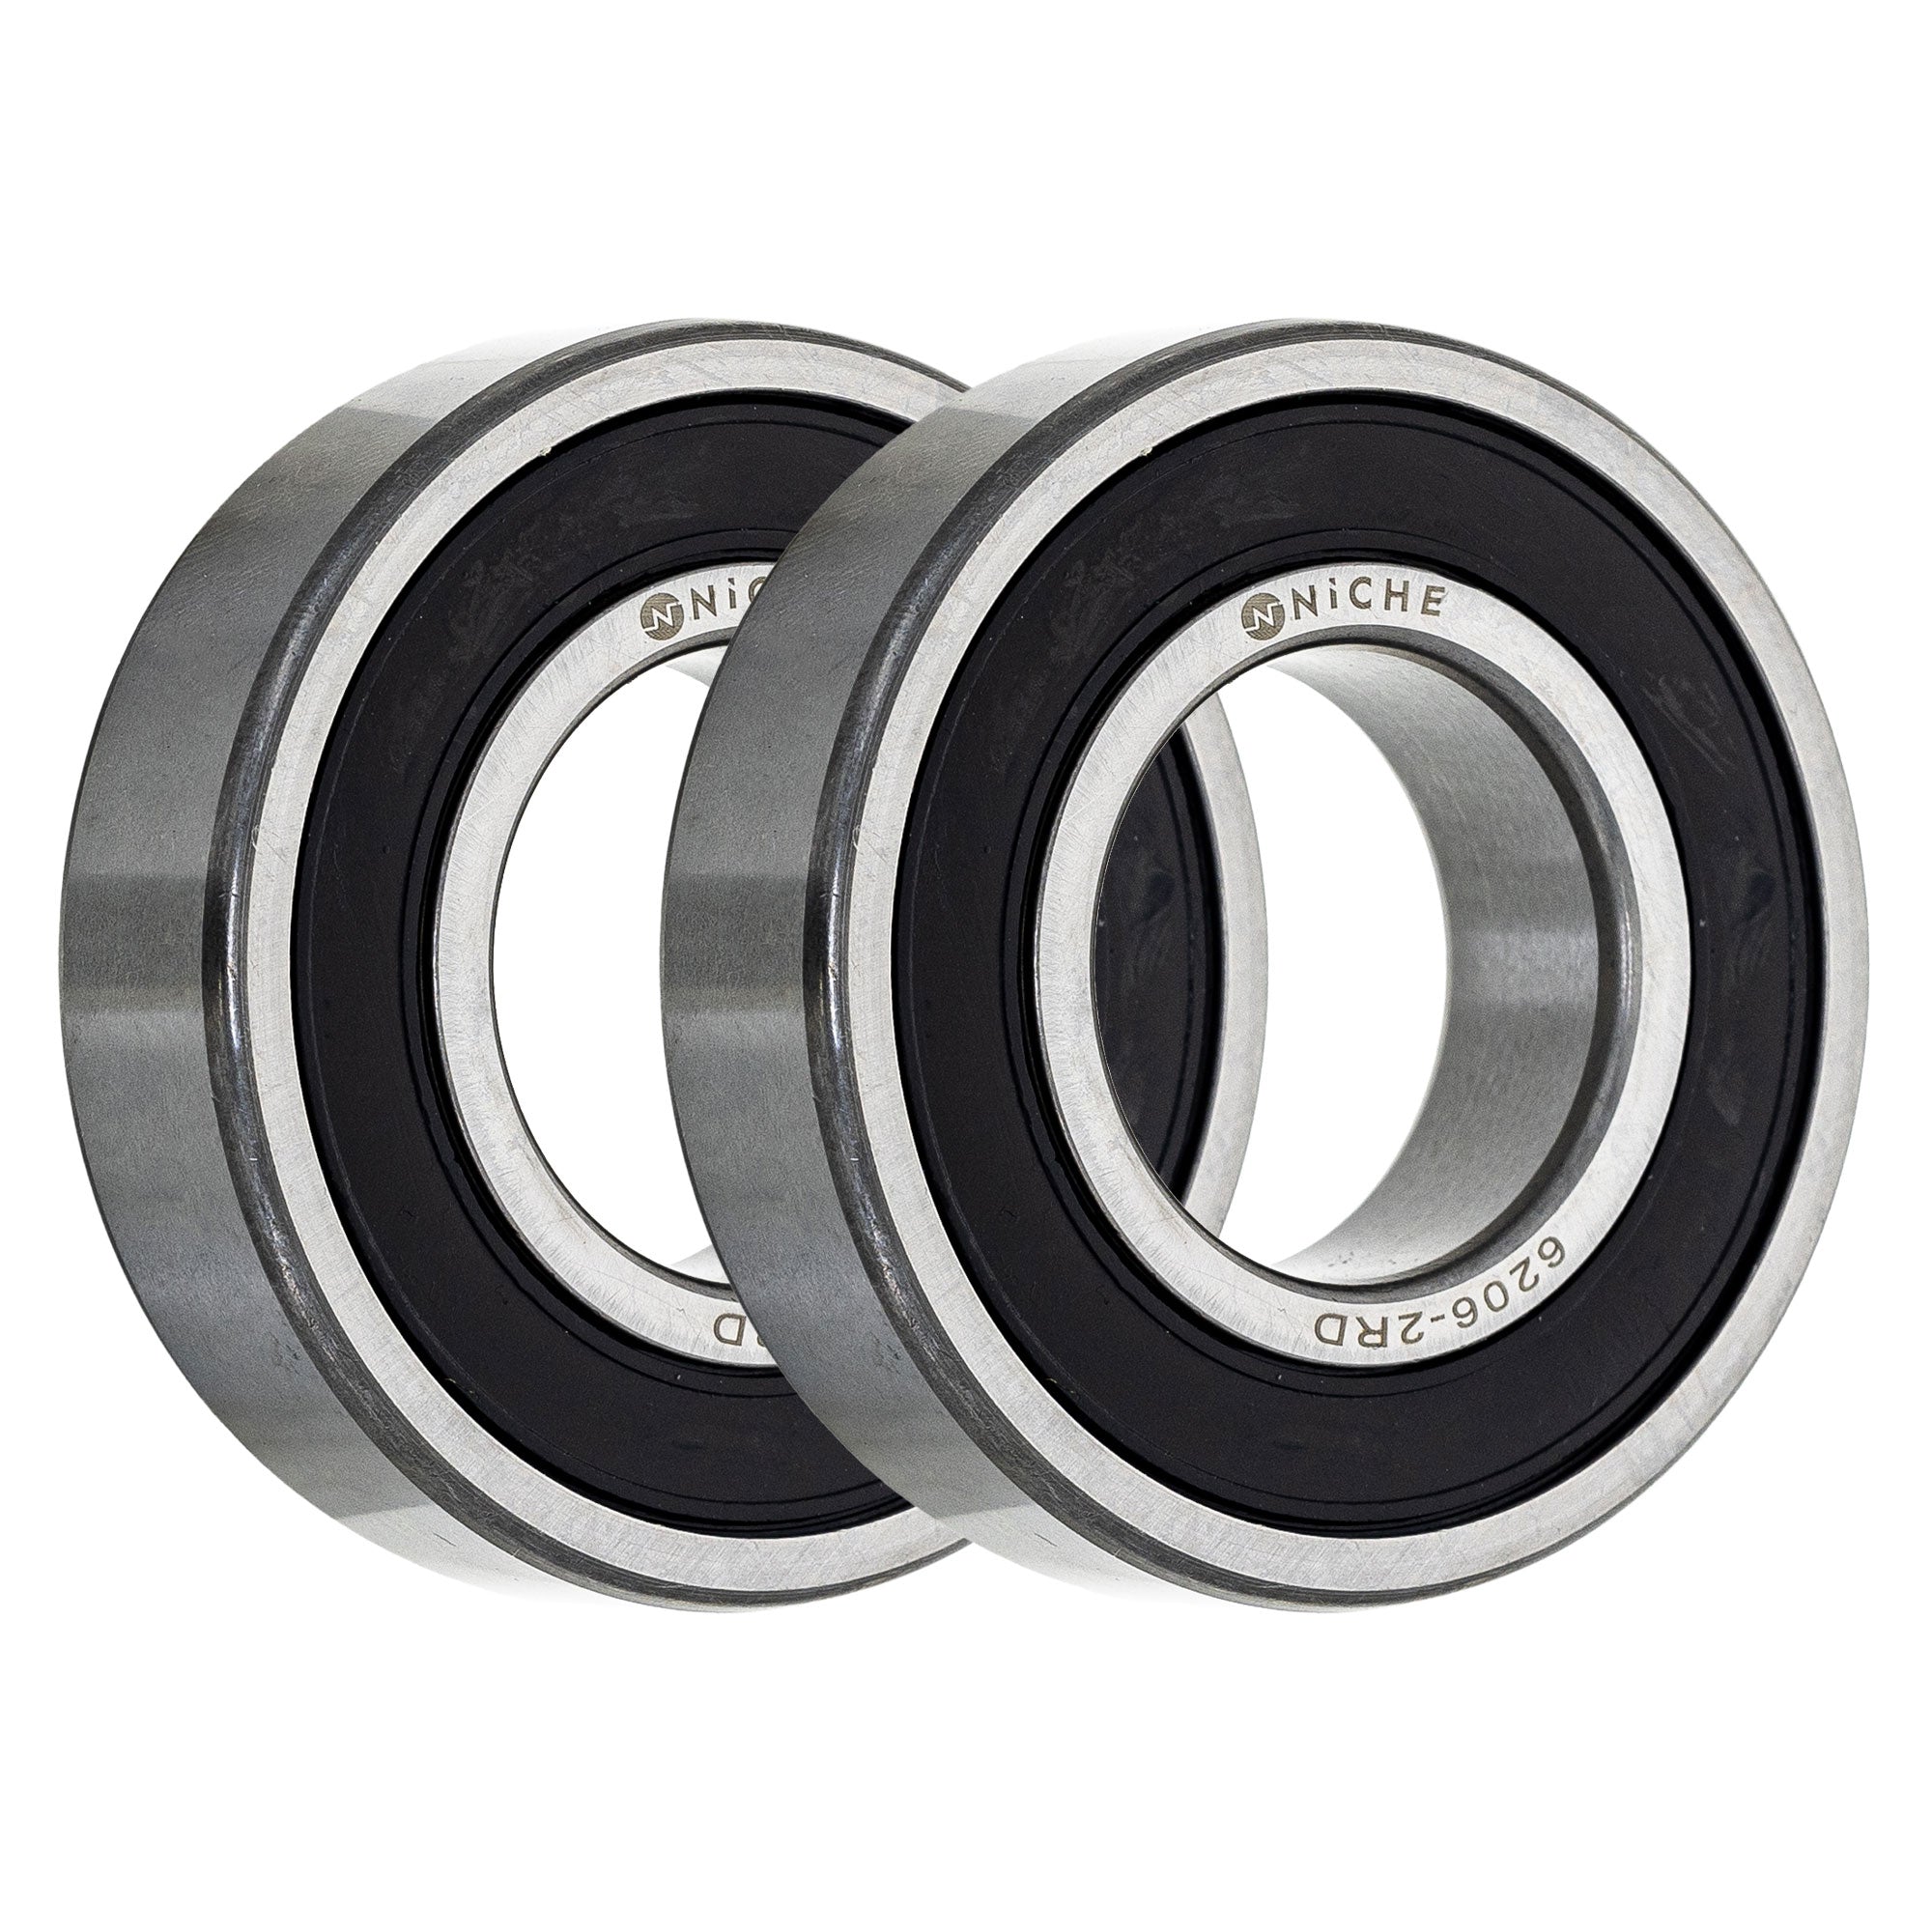 Electric Grade, Single Row, Deep Groove, Ball Bearing Pack of 2 2-Pack for zOTHER ZRX1100 NICHE 519-CBB2270R